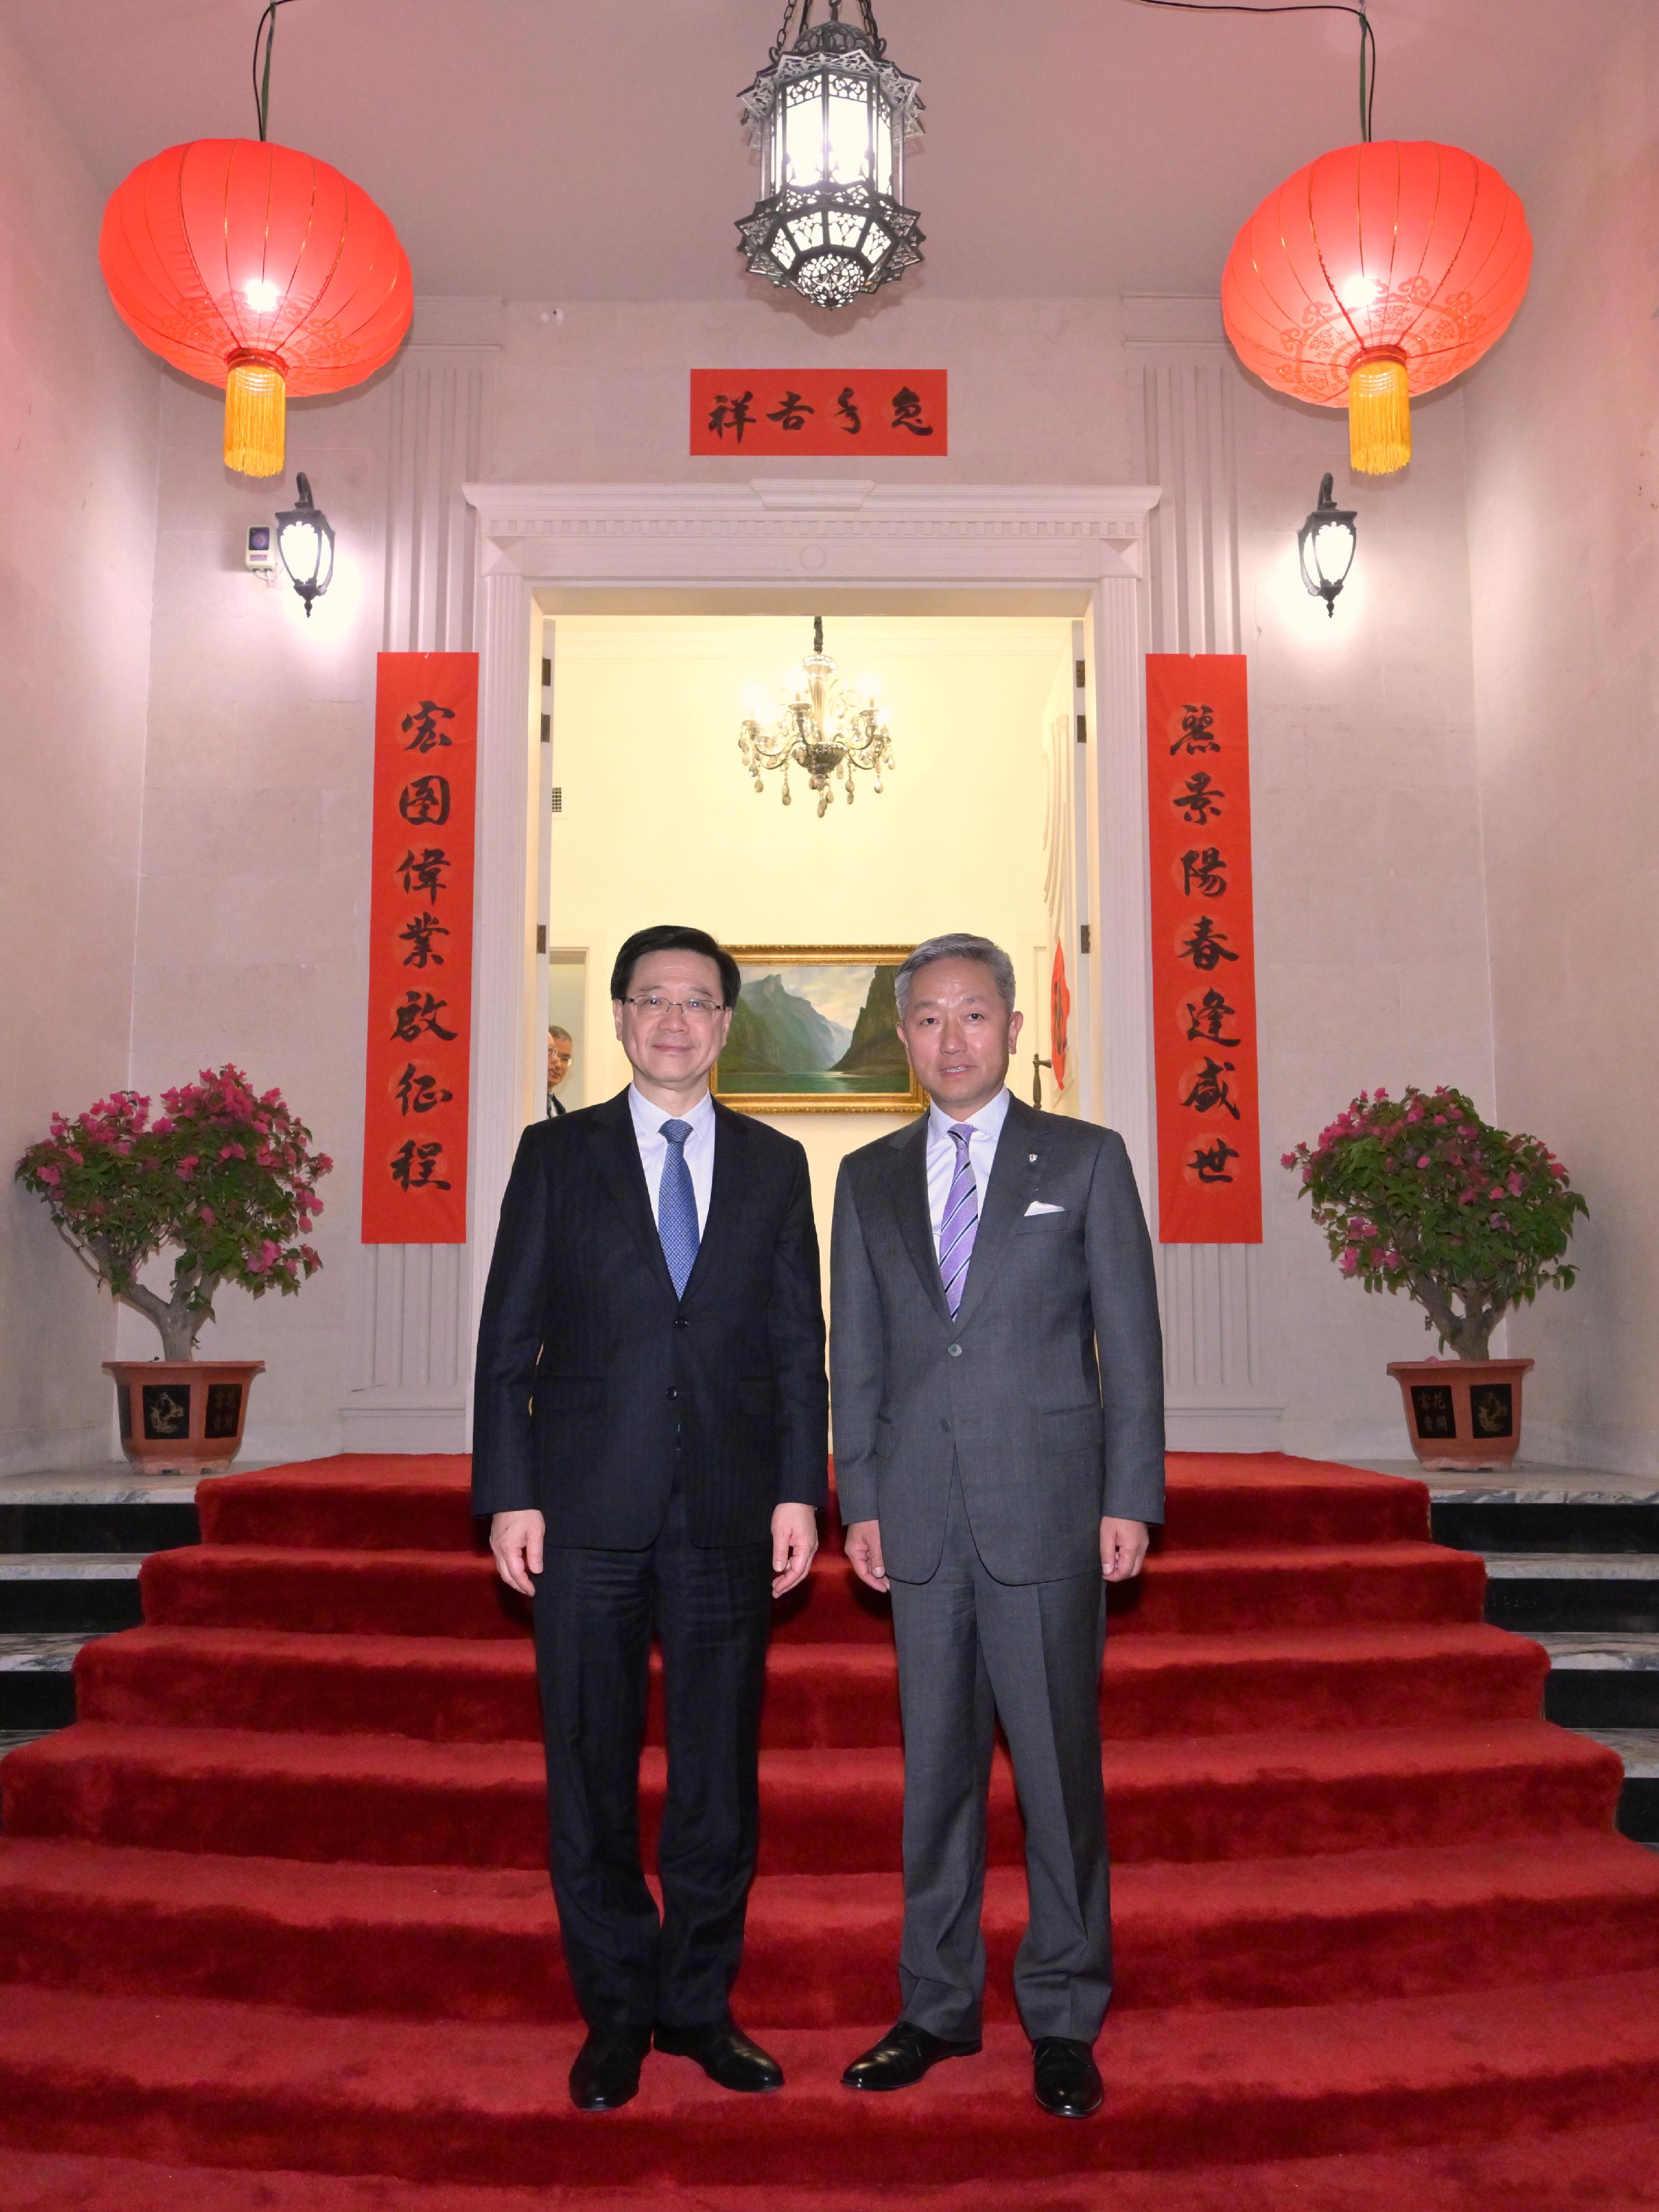 The Chief Executive, Mr John Lee (left), in Abu Dhabi, the United Arab Emirates today (February 7, Abu Dhabi time) attends a dinner hosted by the Ambassador Extraordinary and Plenipotentiary of the People's Republic of China to the United Arab Emirates, Mr Zhang Yiming (right).